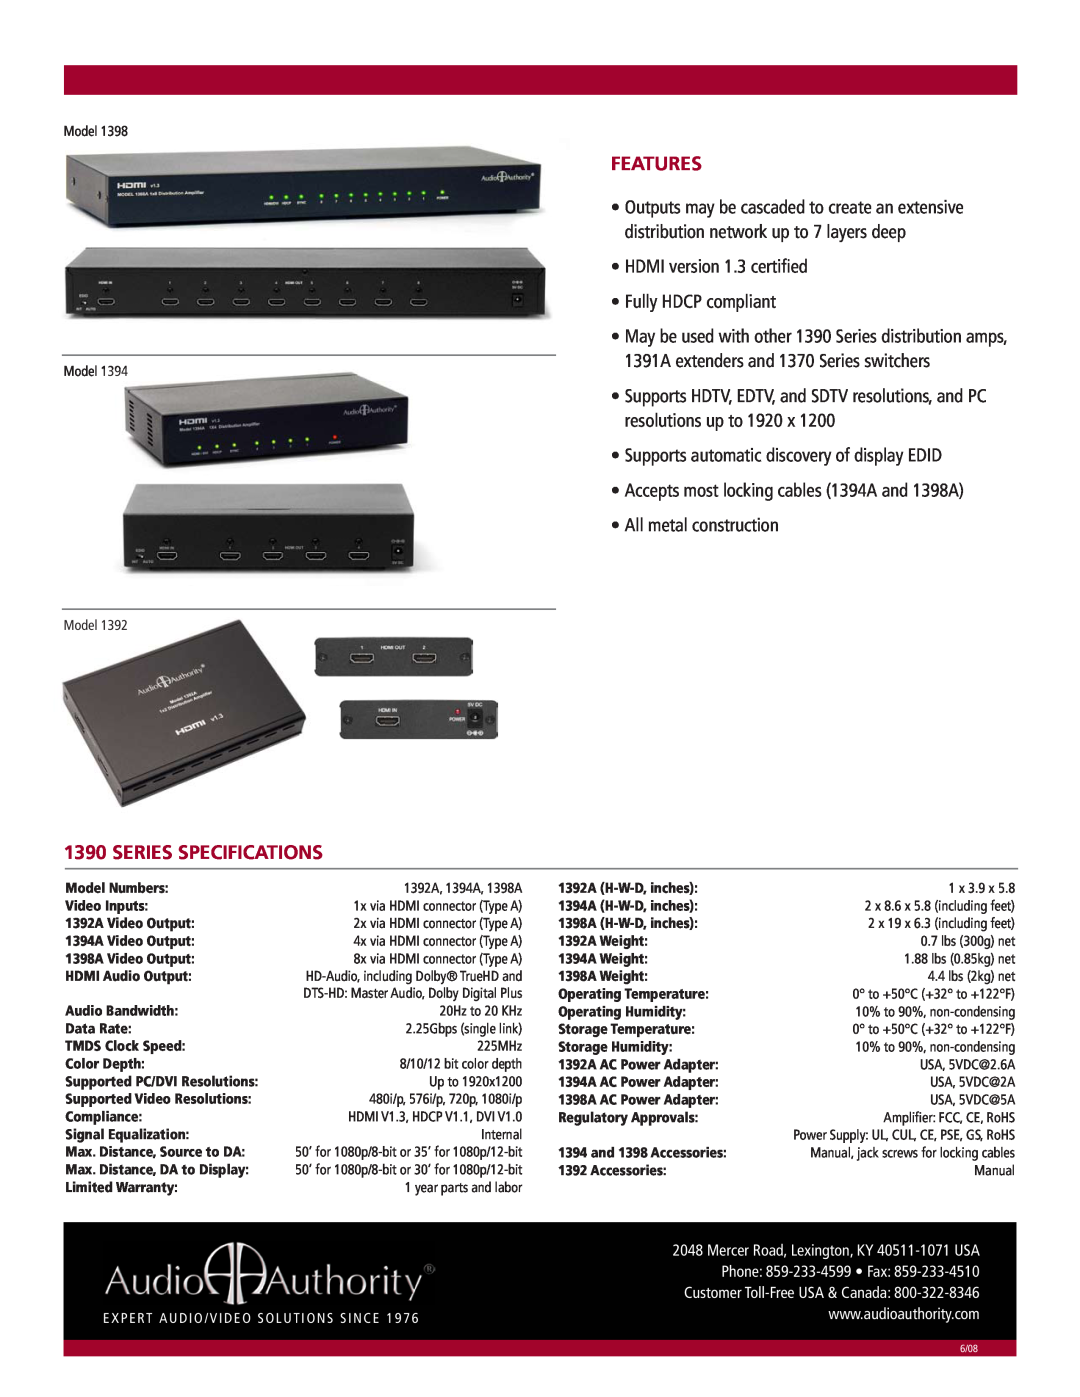 Audio Authority 1390A Series Features, Series Specifications, Model Model Model, Mercer Road, Lexington, KY 40511-1071USA 